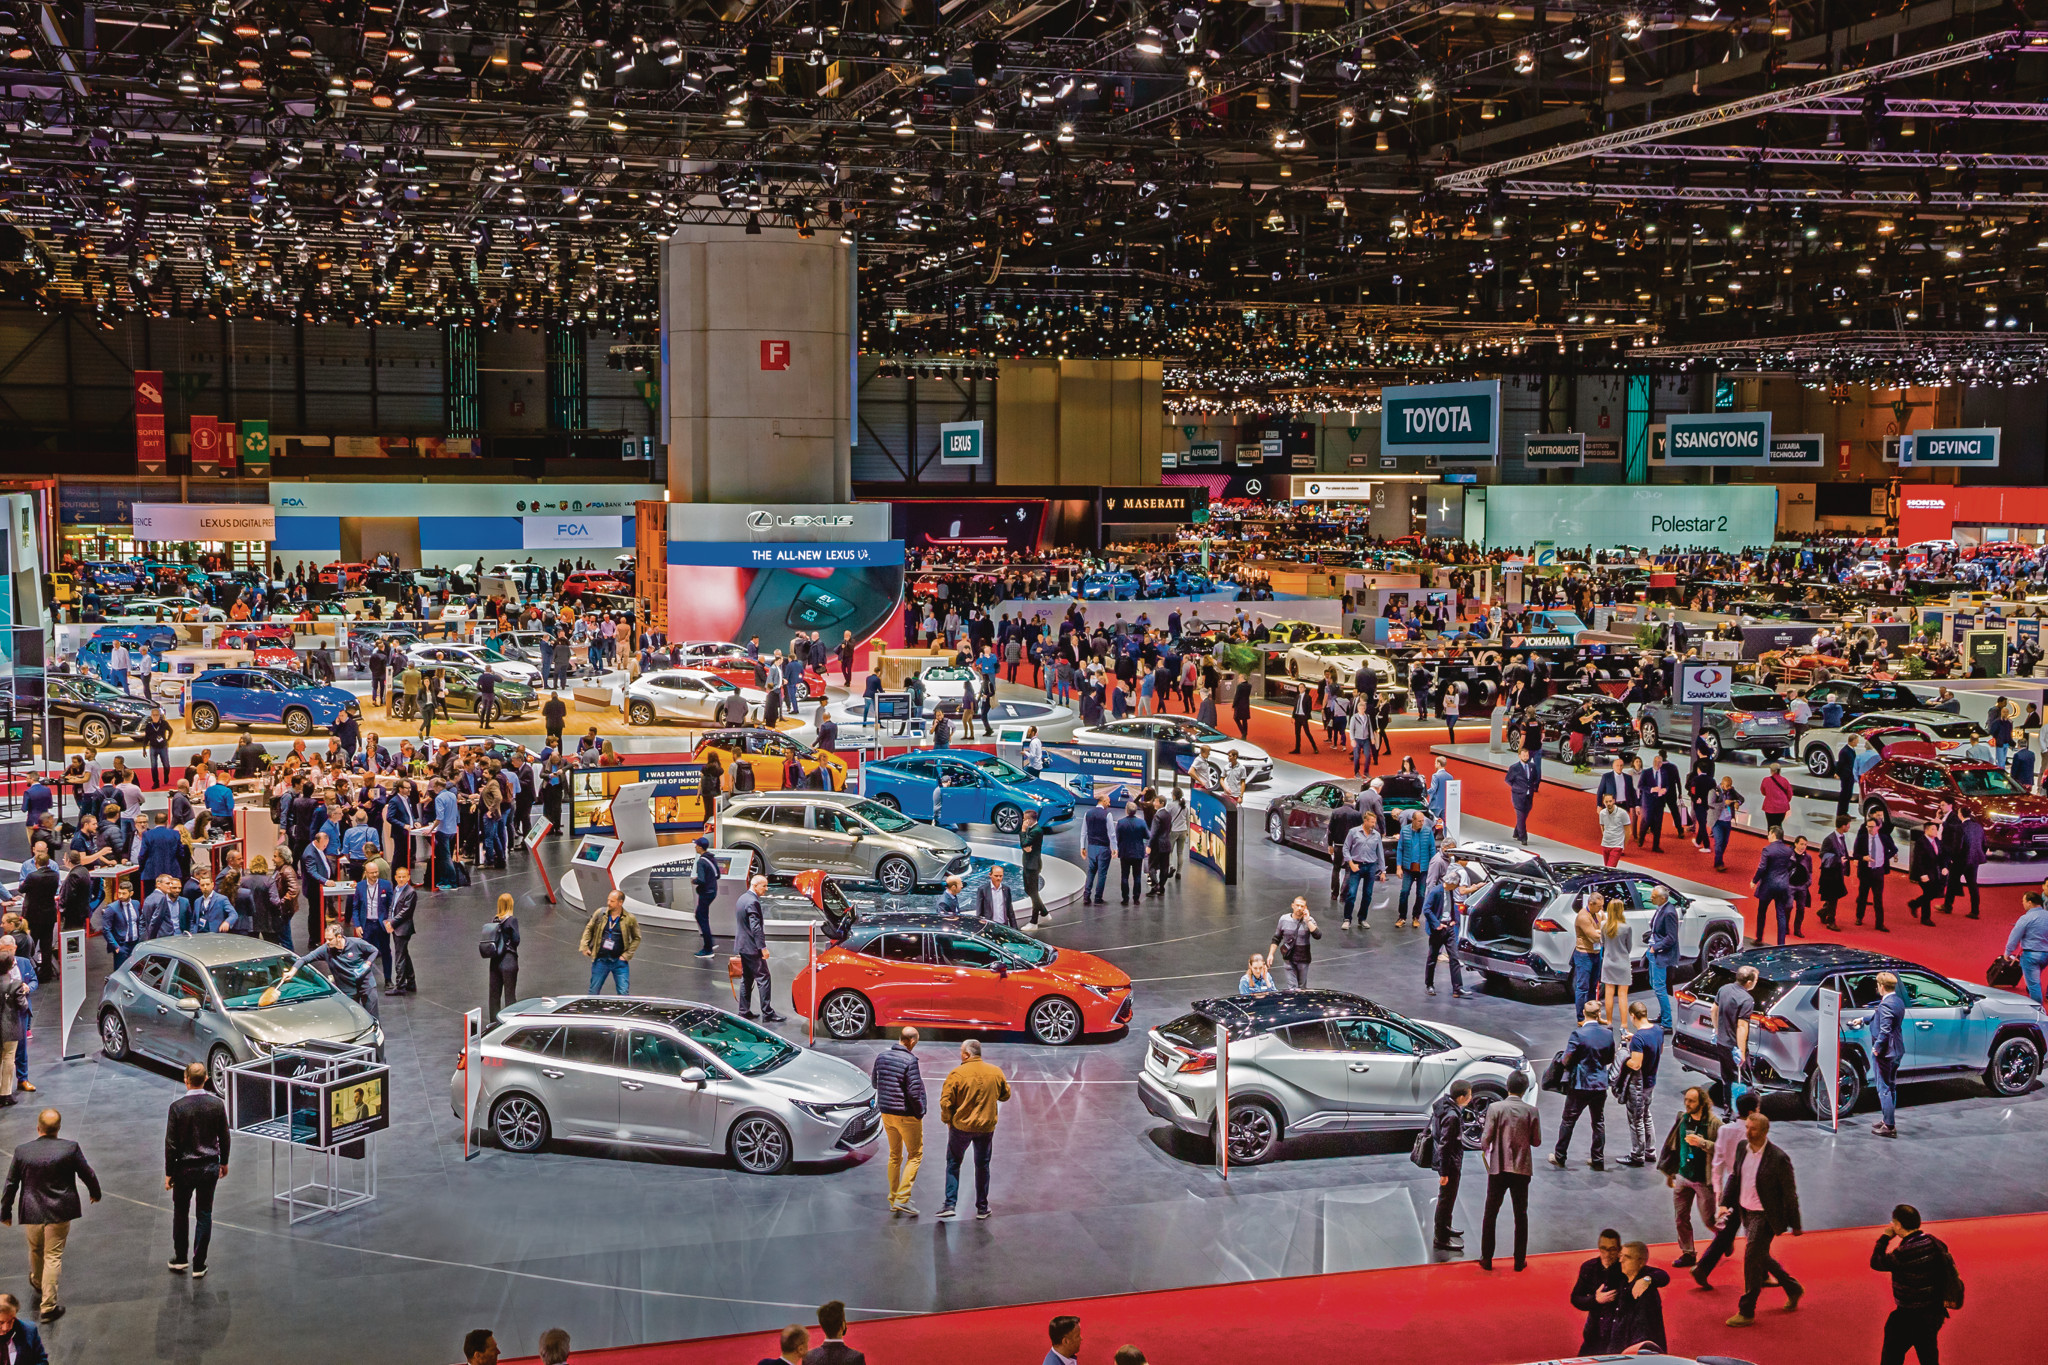 Visitors and cars overview of the 89th Geneva International Motor Show. Geneva, Switzerland - March 6, 2019.